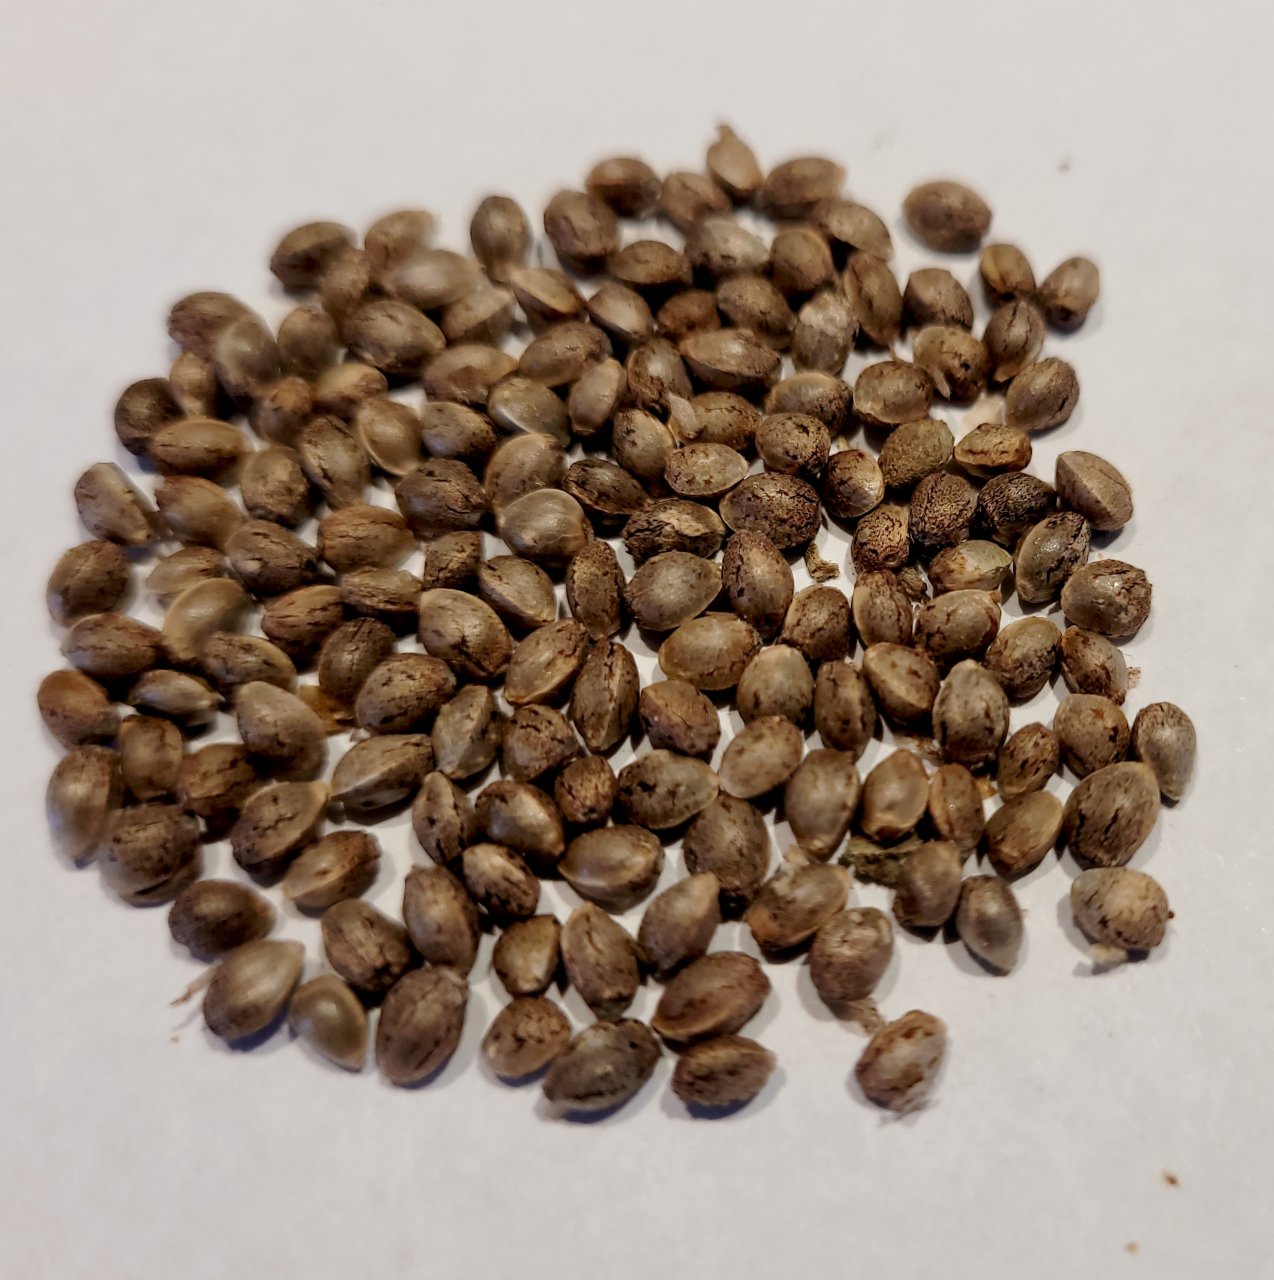 20220624_181804 Sour G STS striped seeds.jpg